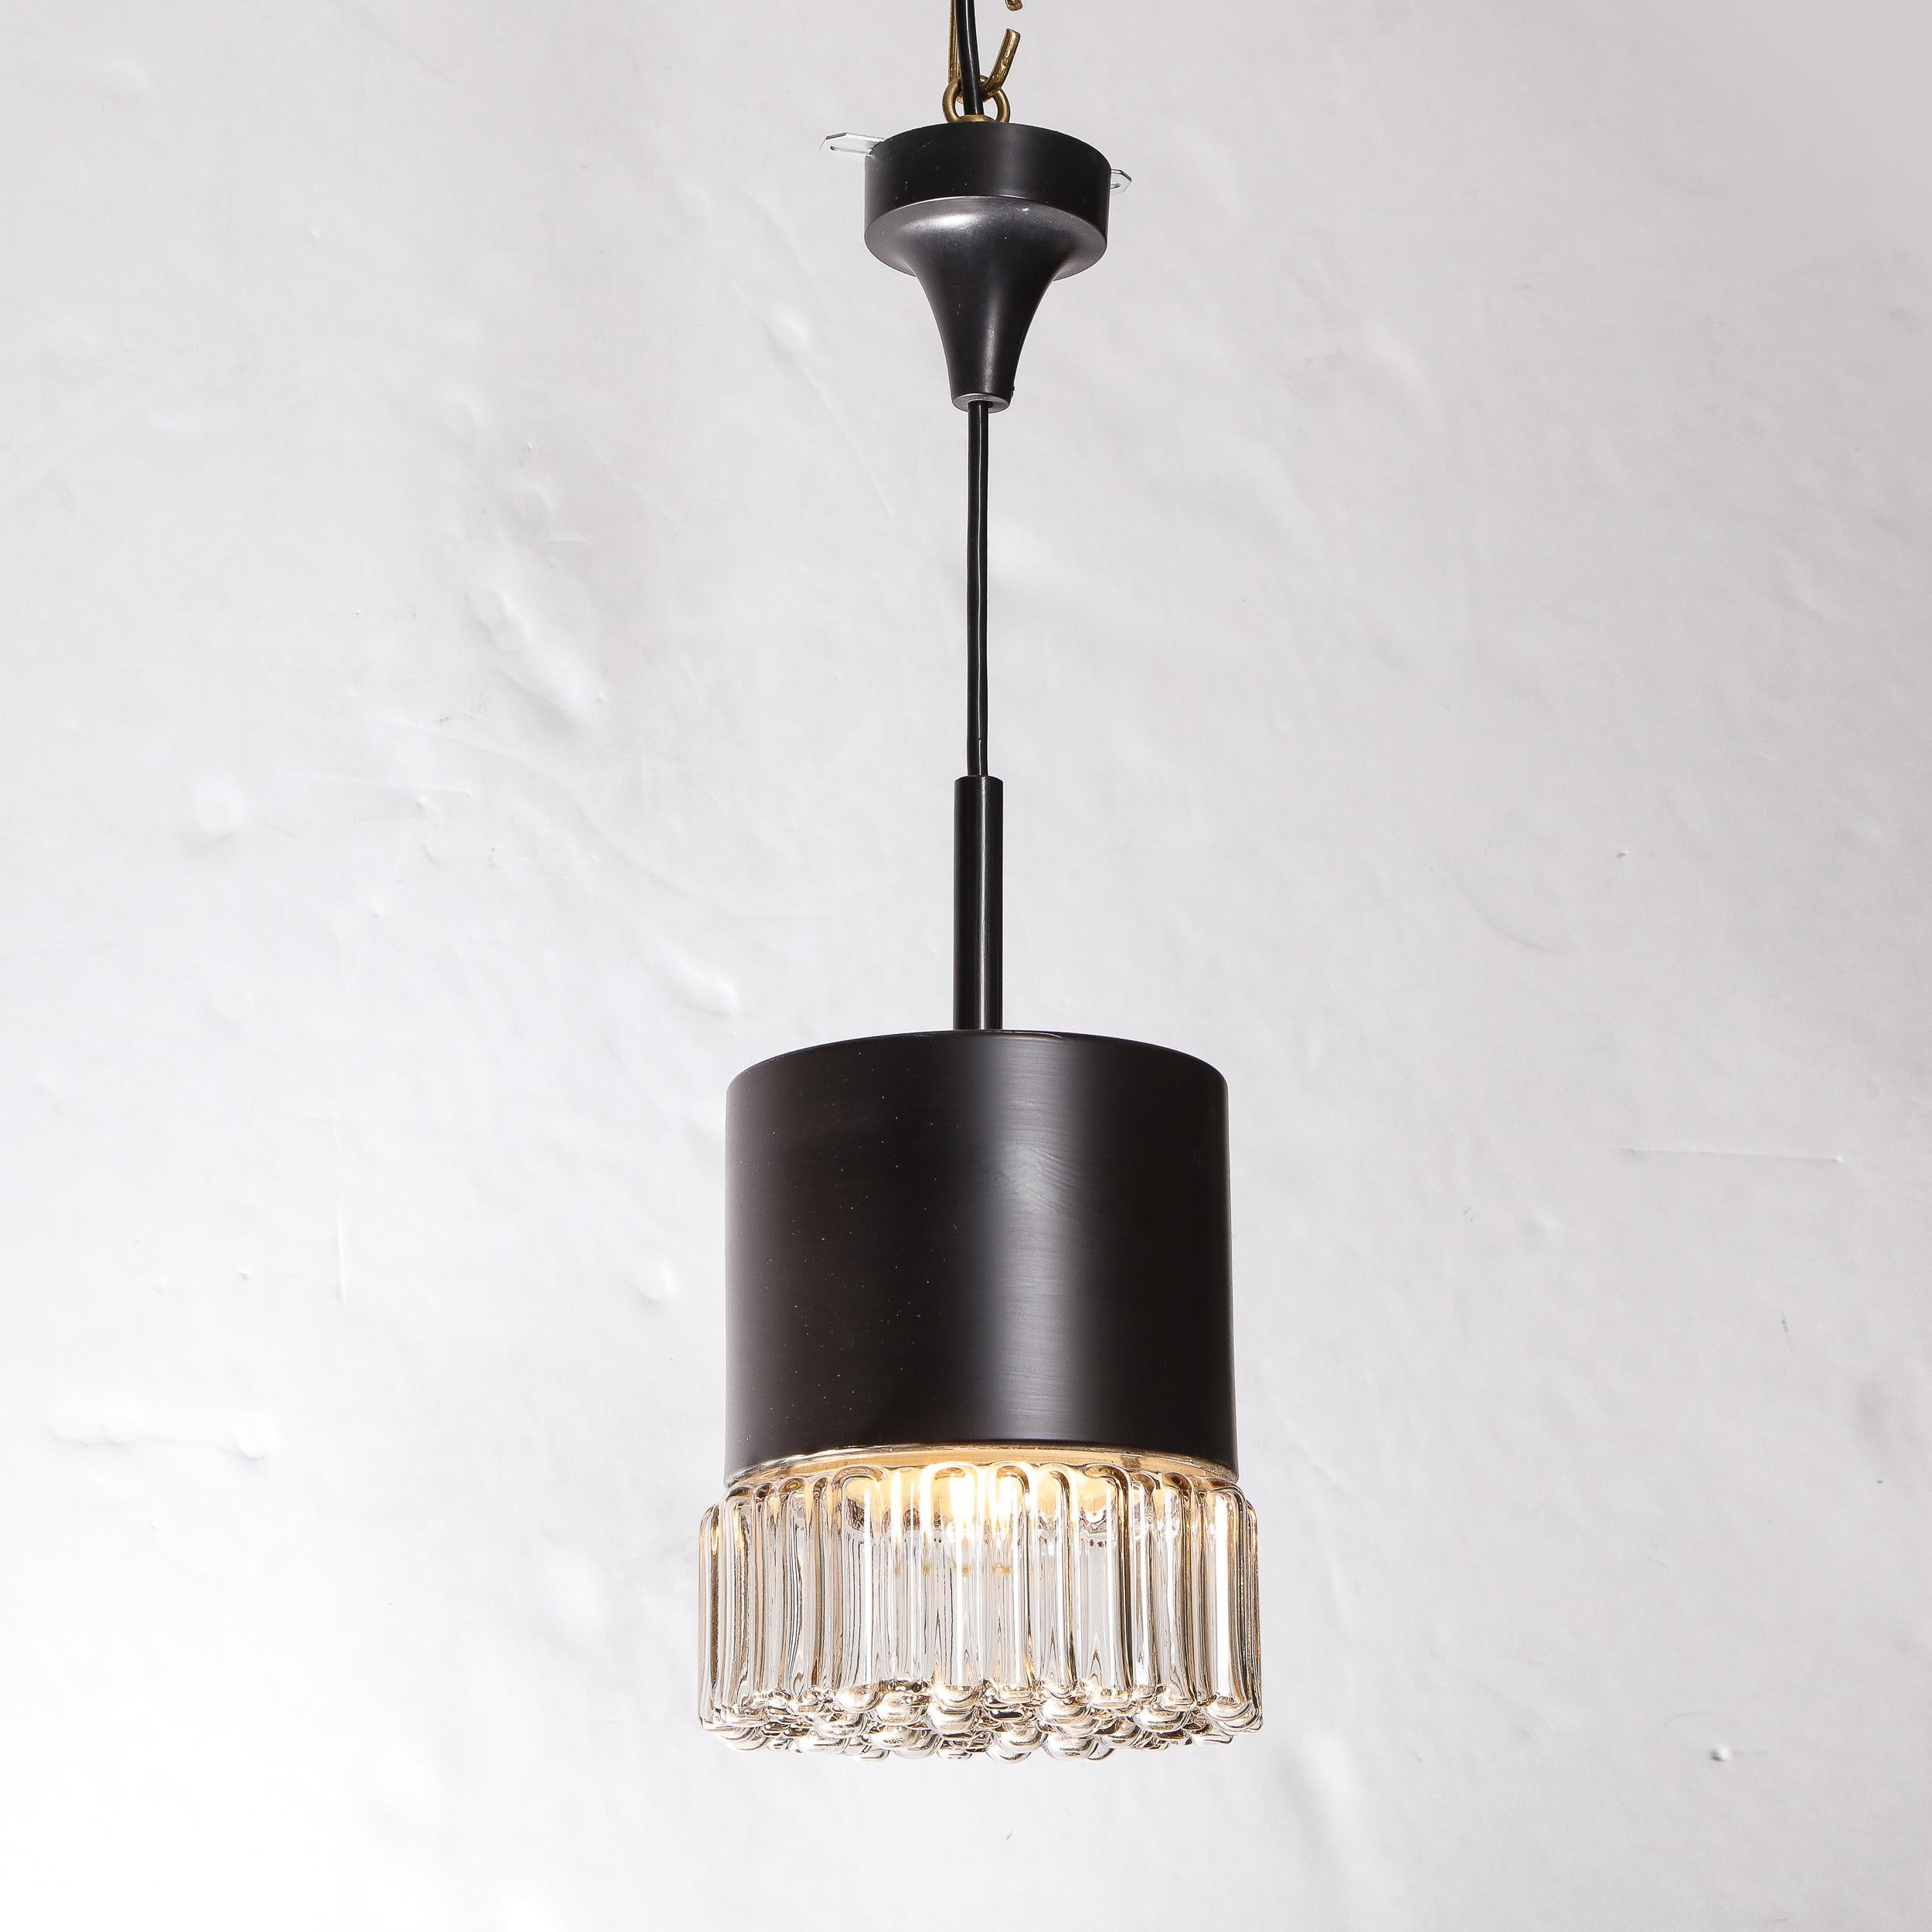 This stunning Mid-Century Modern pendant was realized by the esteemed lighting atelier of Glashütte Limburgh in Germany, circa 1950. It features a cylindrical body and domed canopy in black enamel with a highly textural translucent 